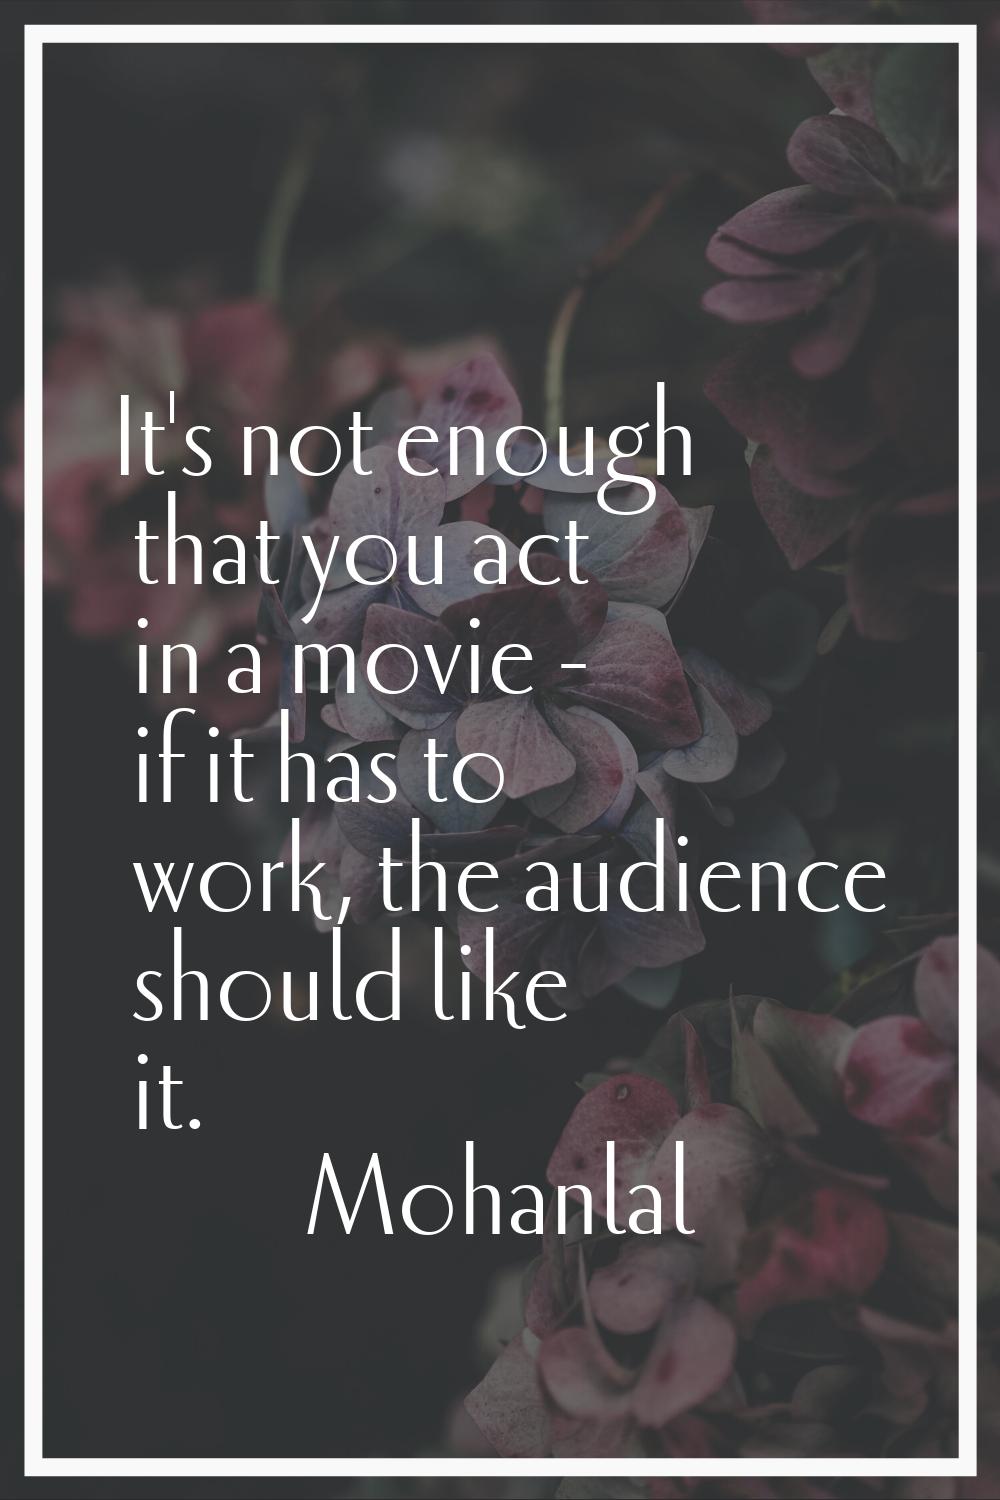 It's not enough that you act in a movie - if it has to work, the audience should like it.